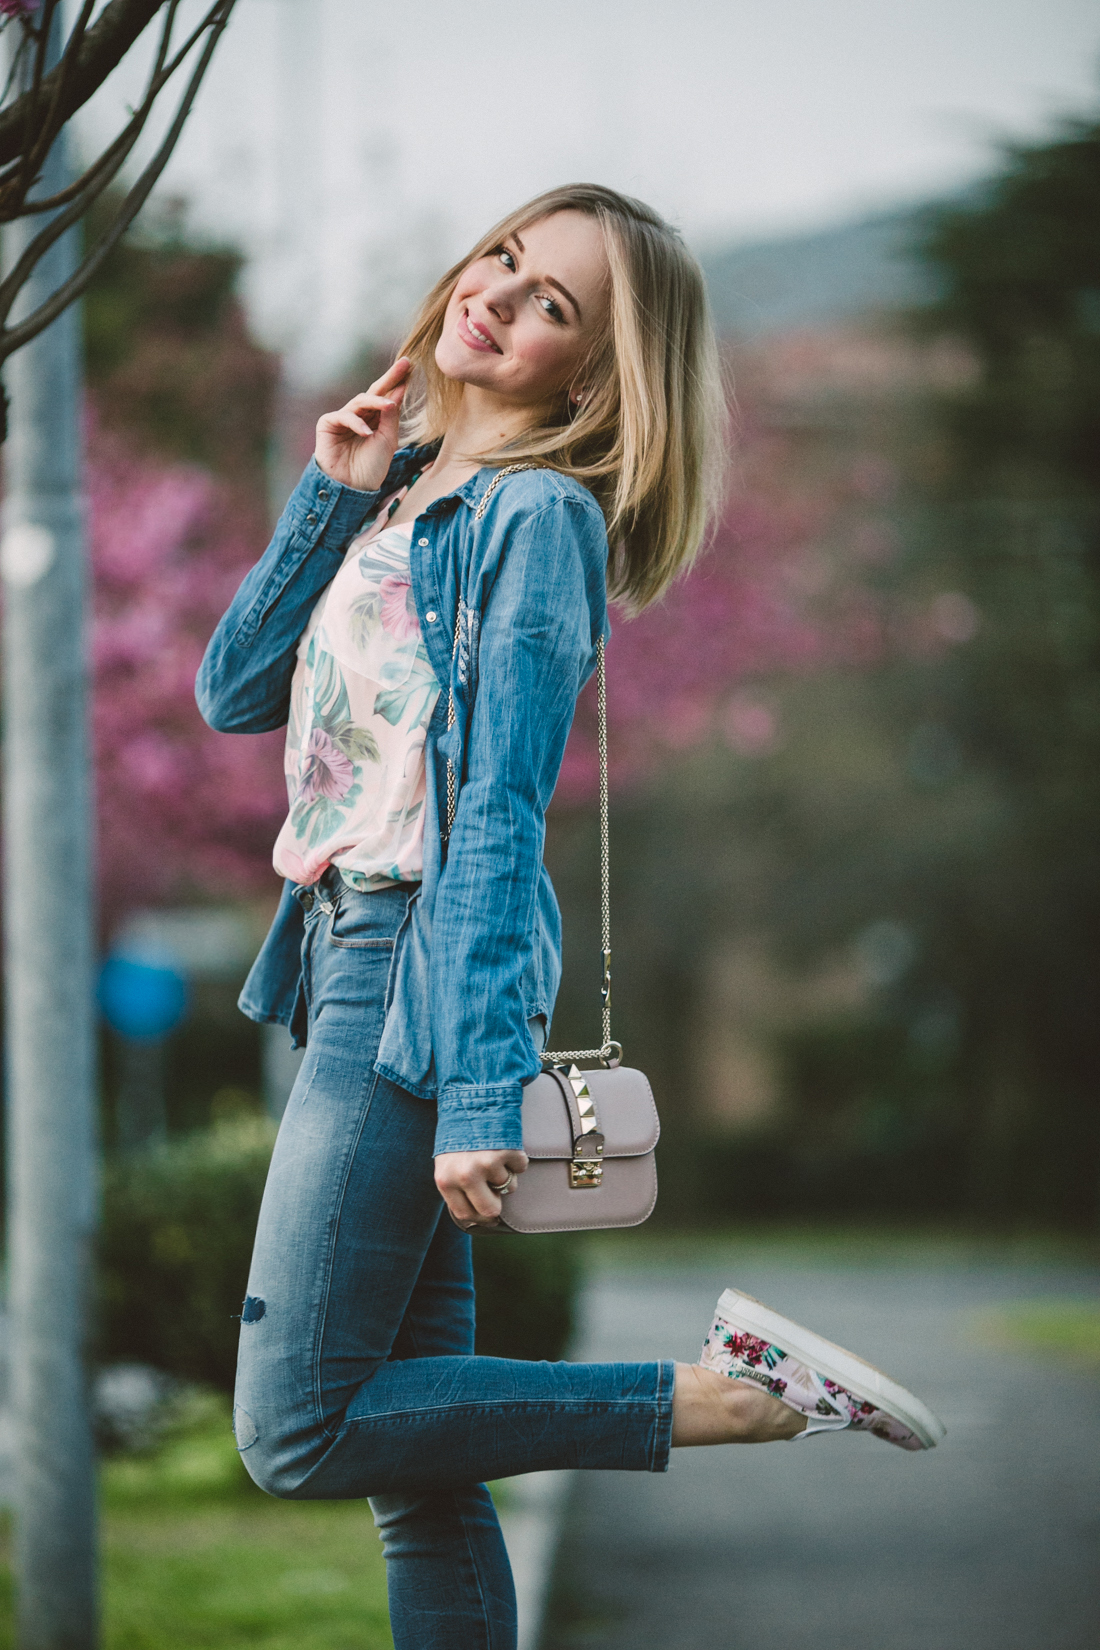 darya kamalova thecablook fashion lifestyle russian italian blogger wears total guess jeans myguess look with valentino rockstud glamrock cipria pale rose bag-4681